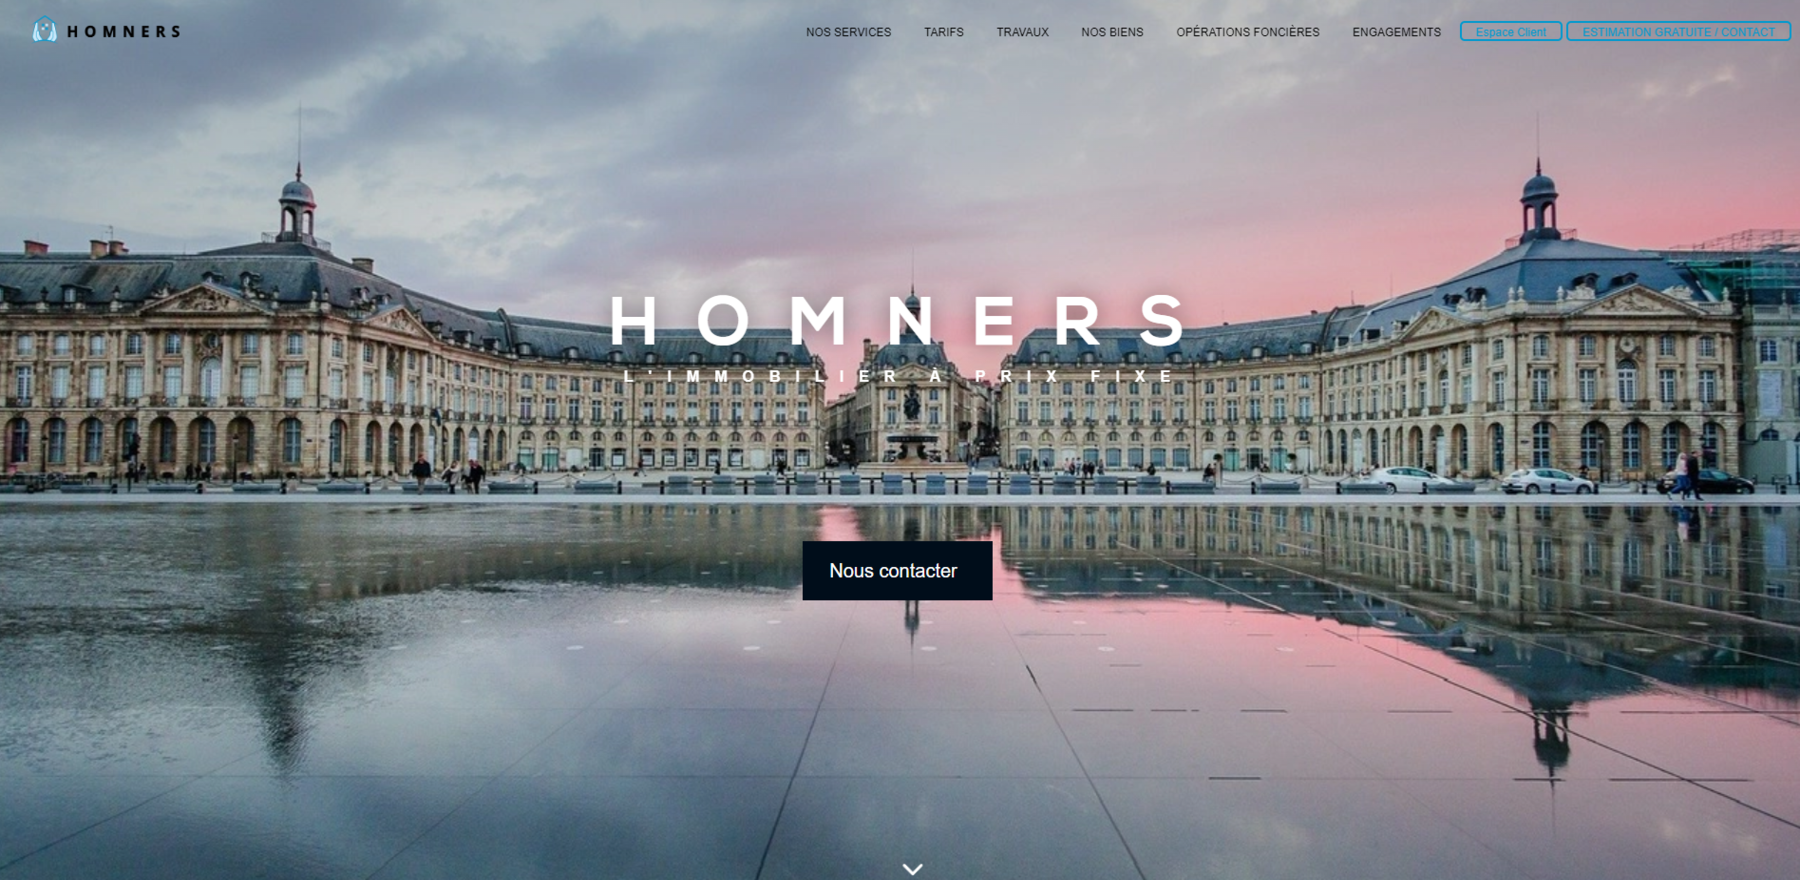 Image d'exemple Homners